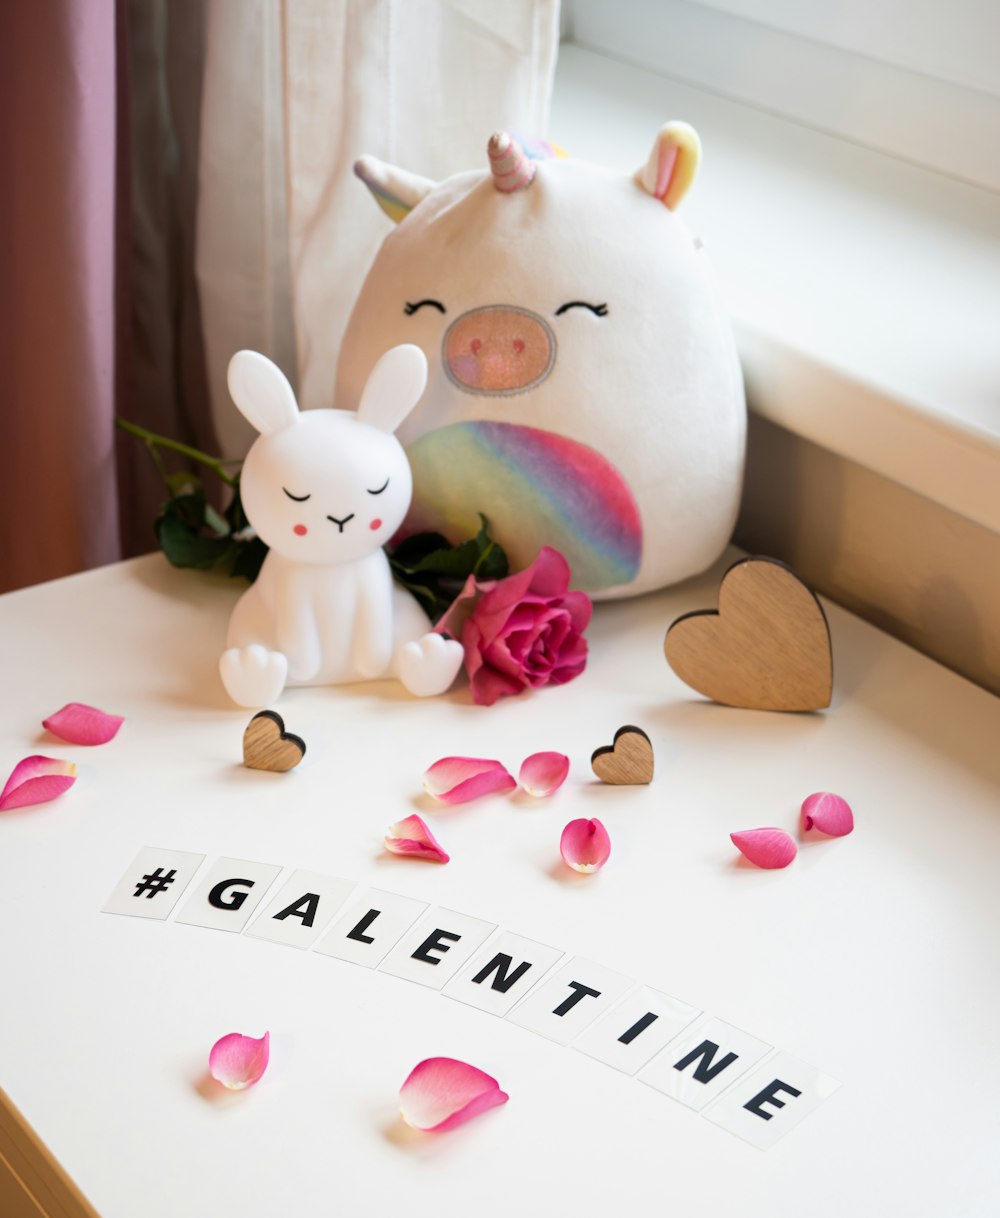 a white stuffed animal next to a pink rose